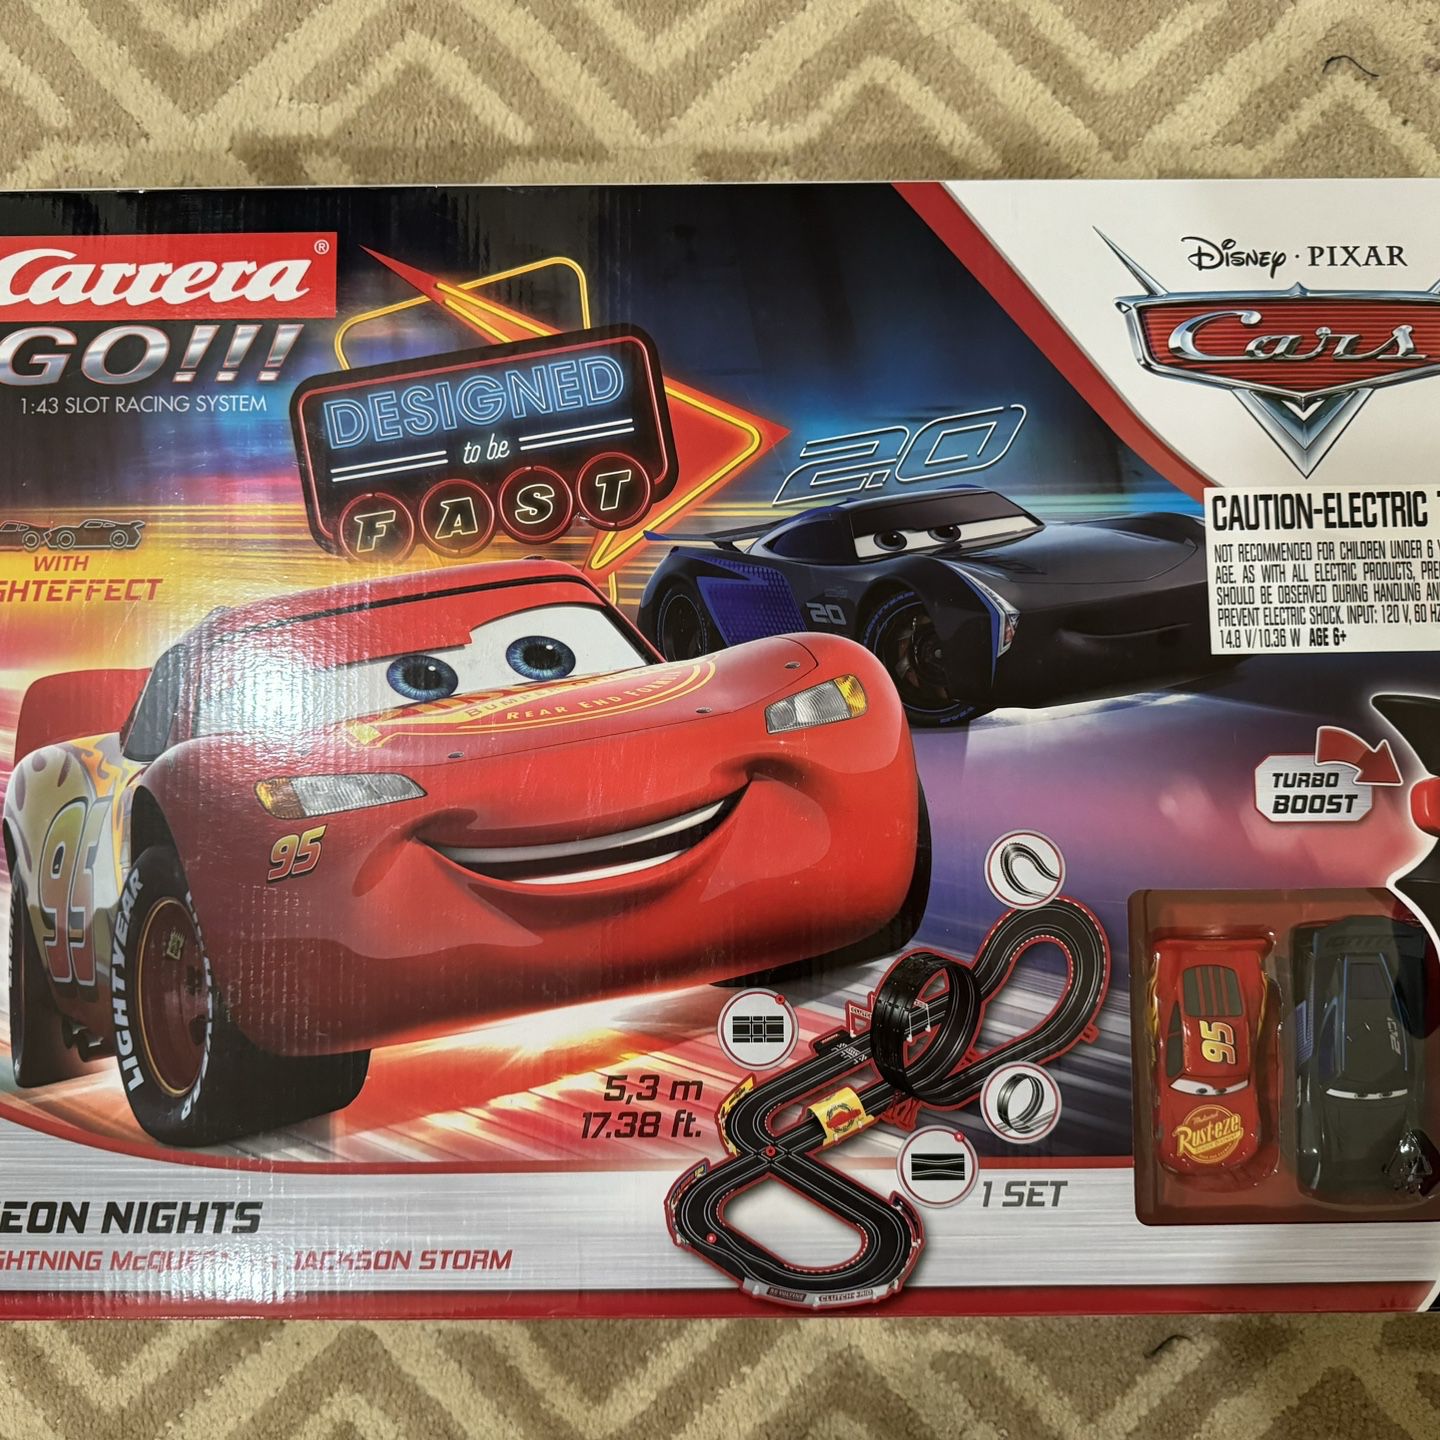 Carrera GO!!! 62477 Disney Pixar Cars Neon Nights Electric Slot Car Racing  Kids Toy Race Track Set Includes 2 Controllers and 2 Cars in 1:43 Scale